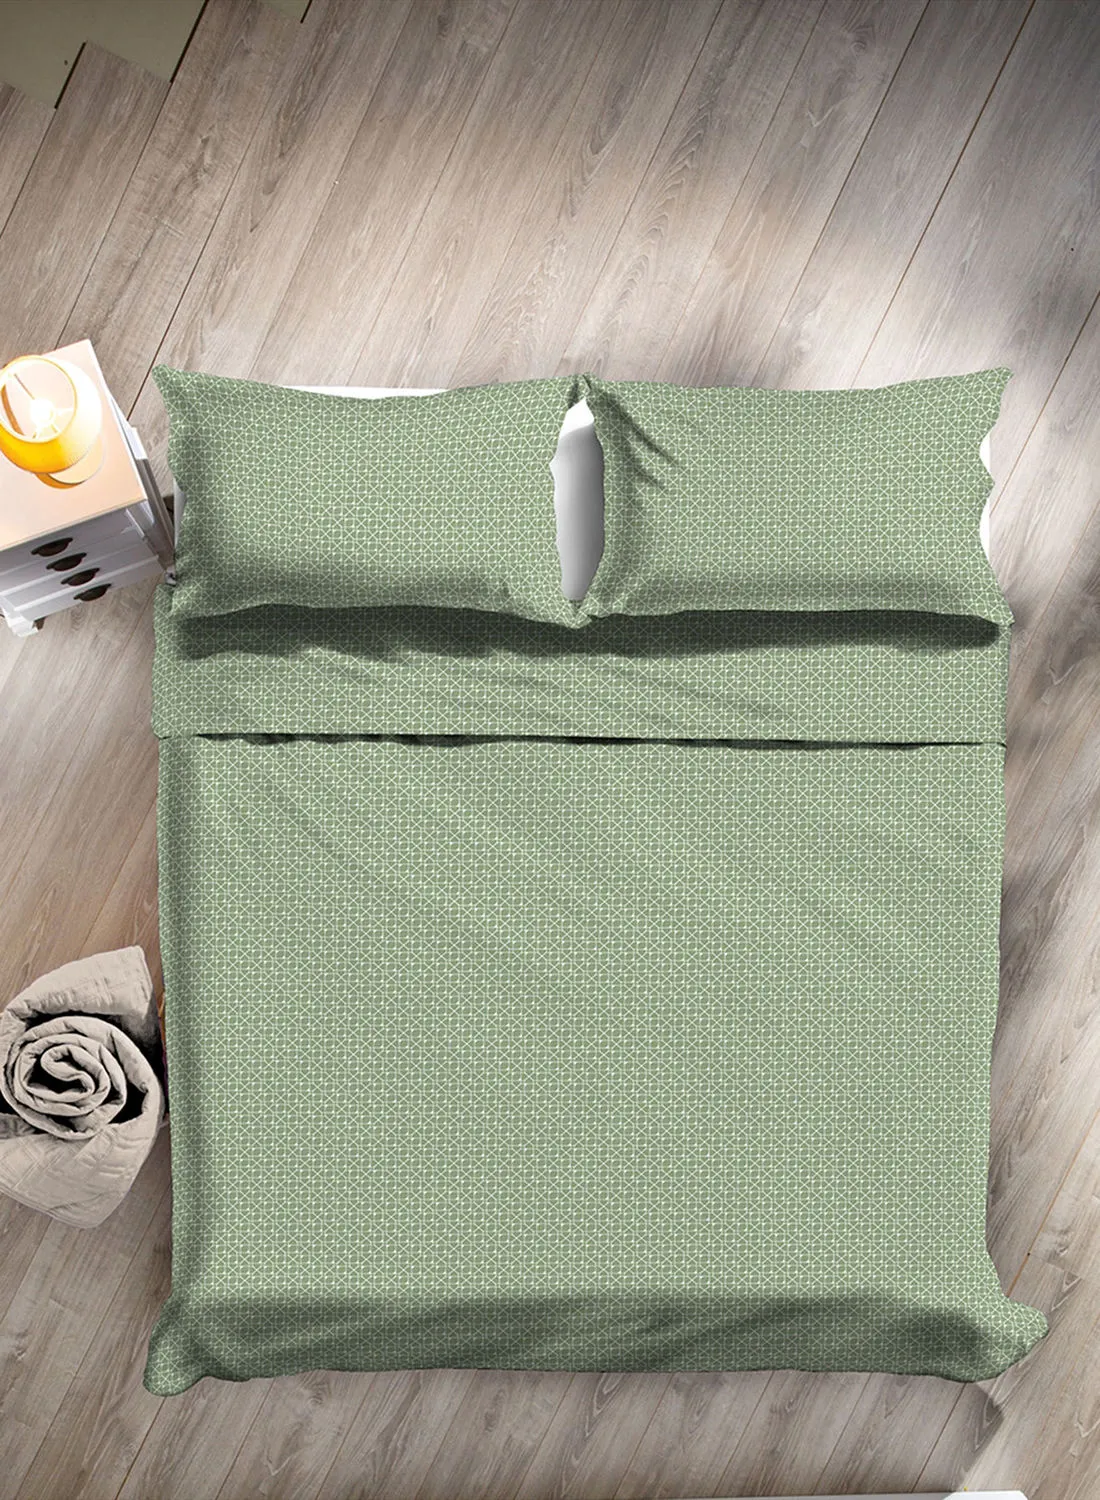 Amal Duvet Cover - With Pillow Cover 50X75 Cm, Comforter 160X200 Cm, - For Queen Size Mattress - Green 100% Cotton Percale -